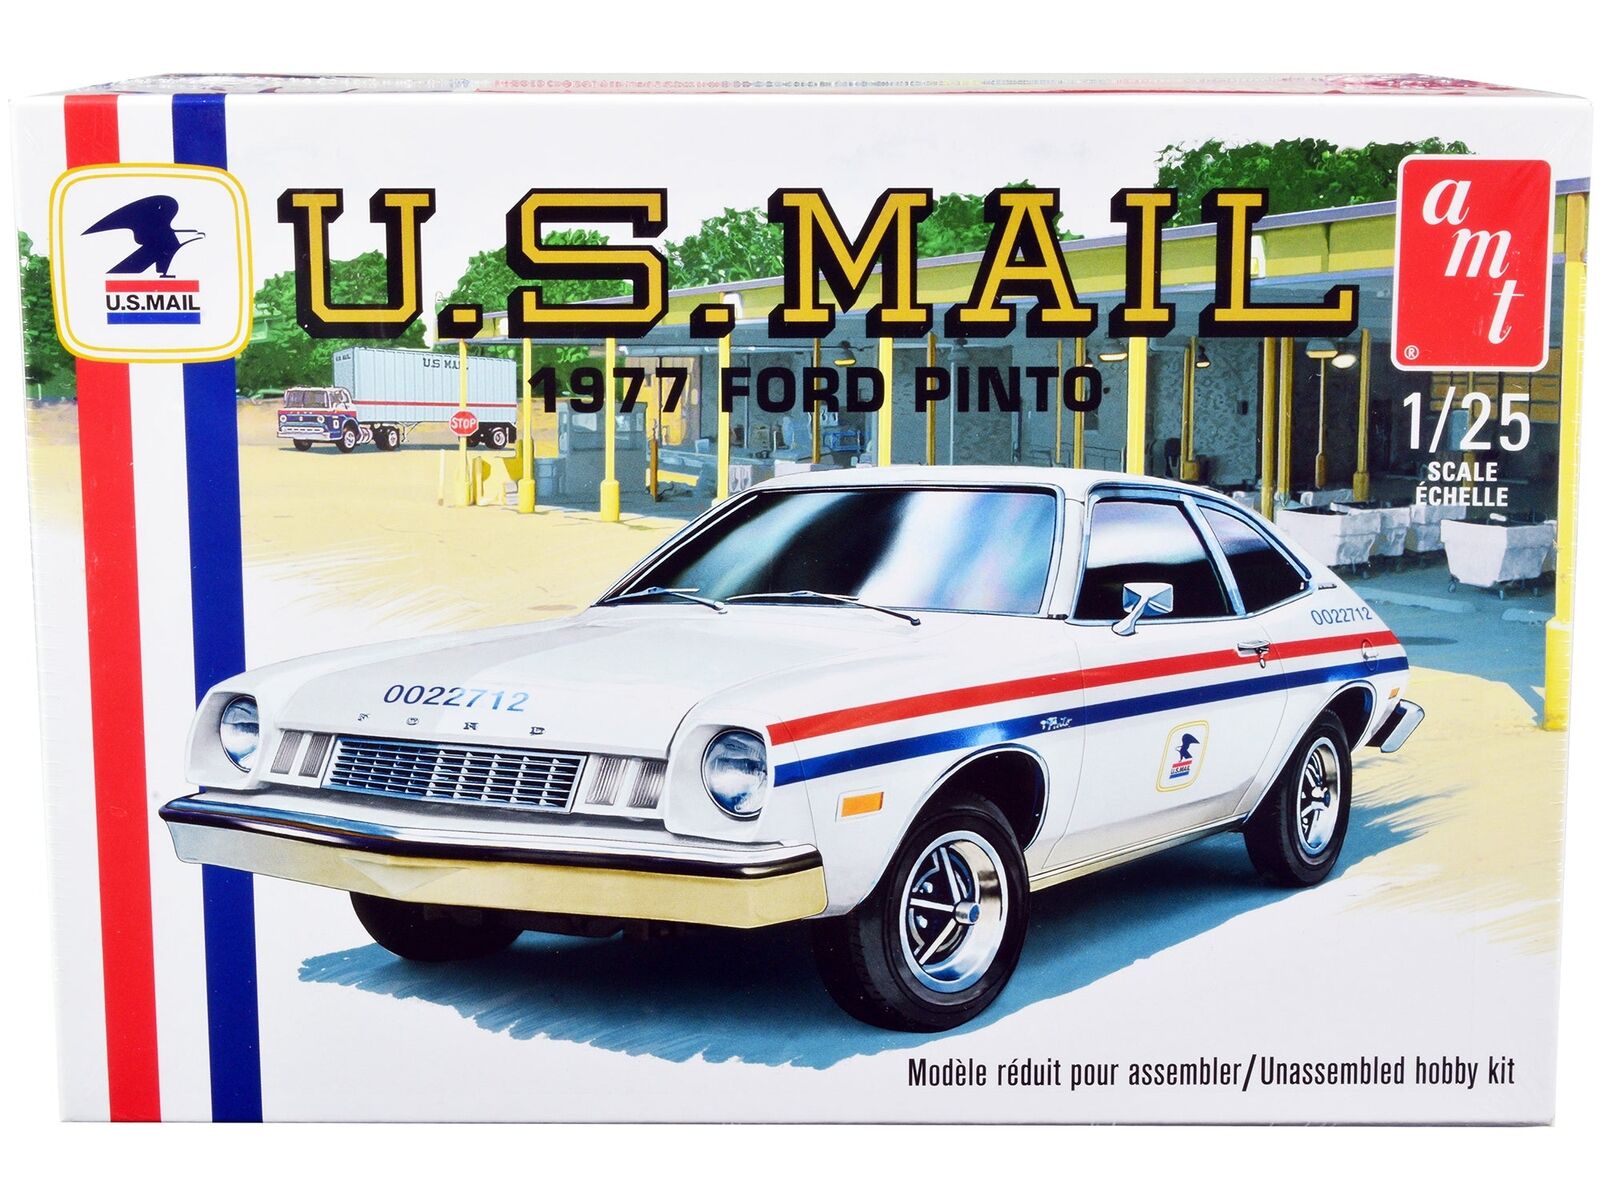 Skill Model Kit 1977 Ford Pinto United States Postal Service USPS 1/25 Scale